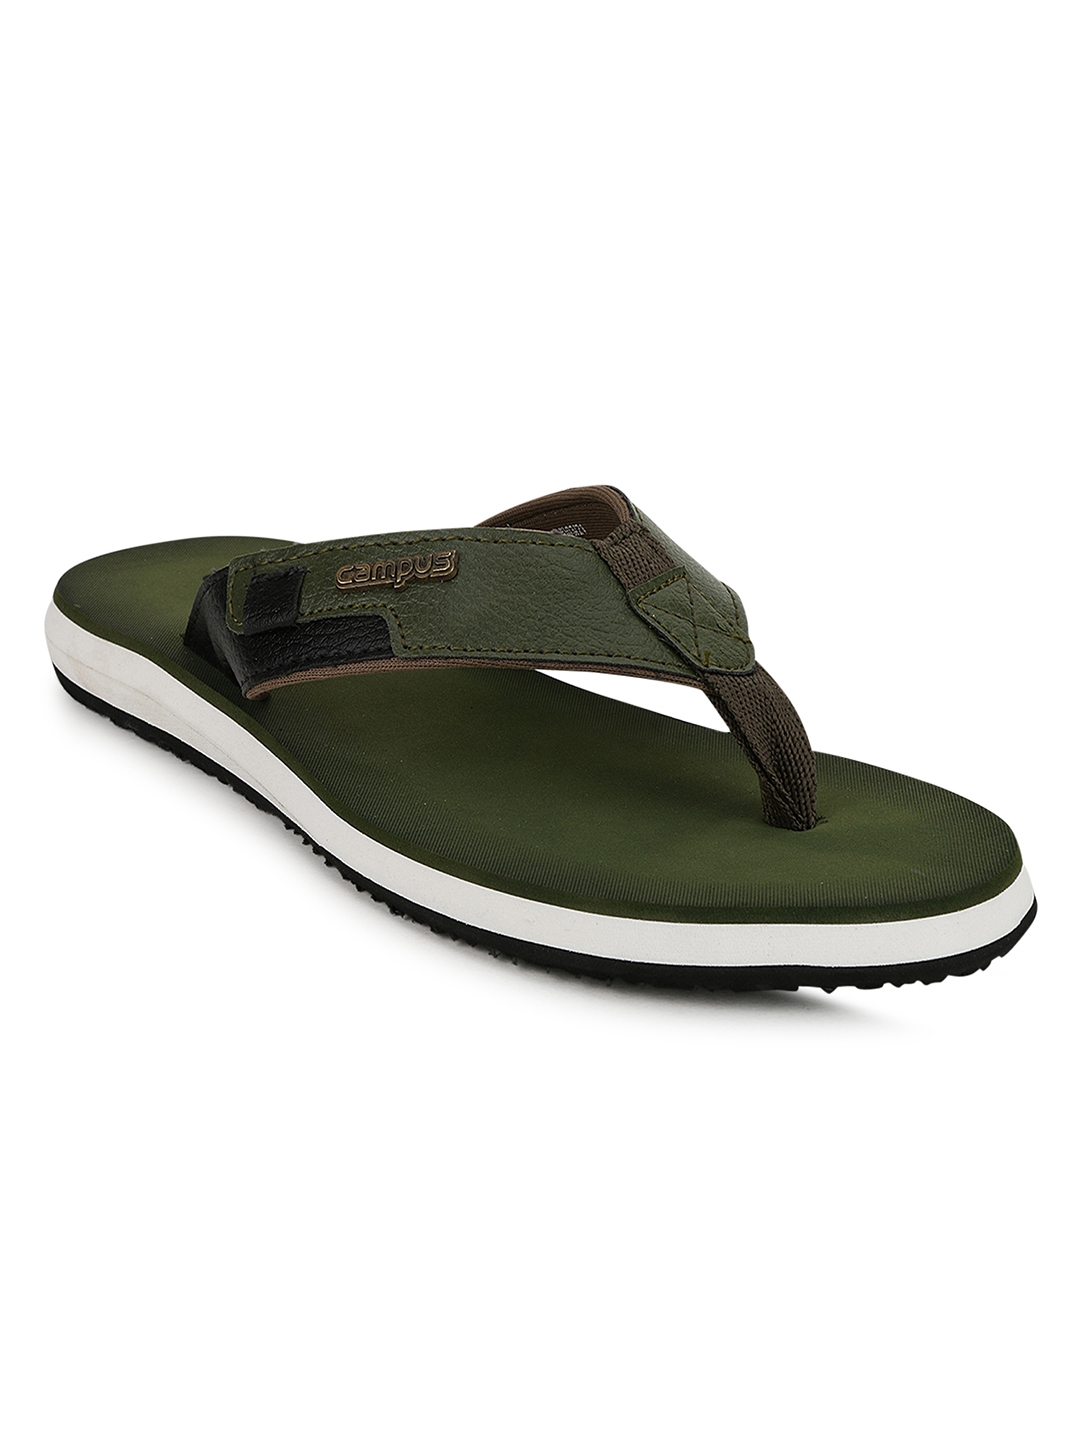 Campus Shoes | Green Slippers